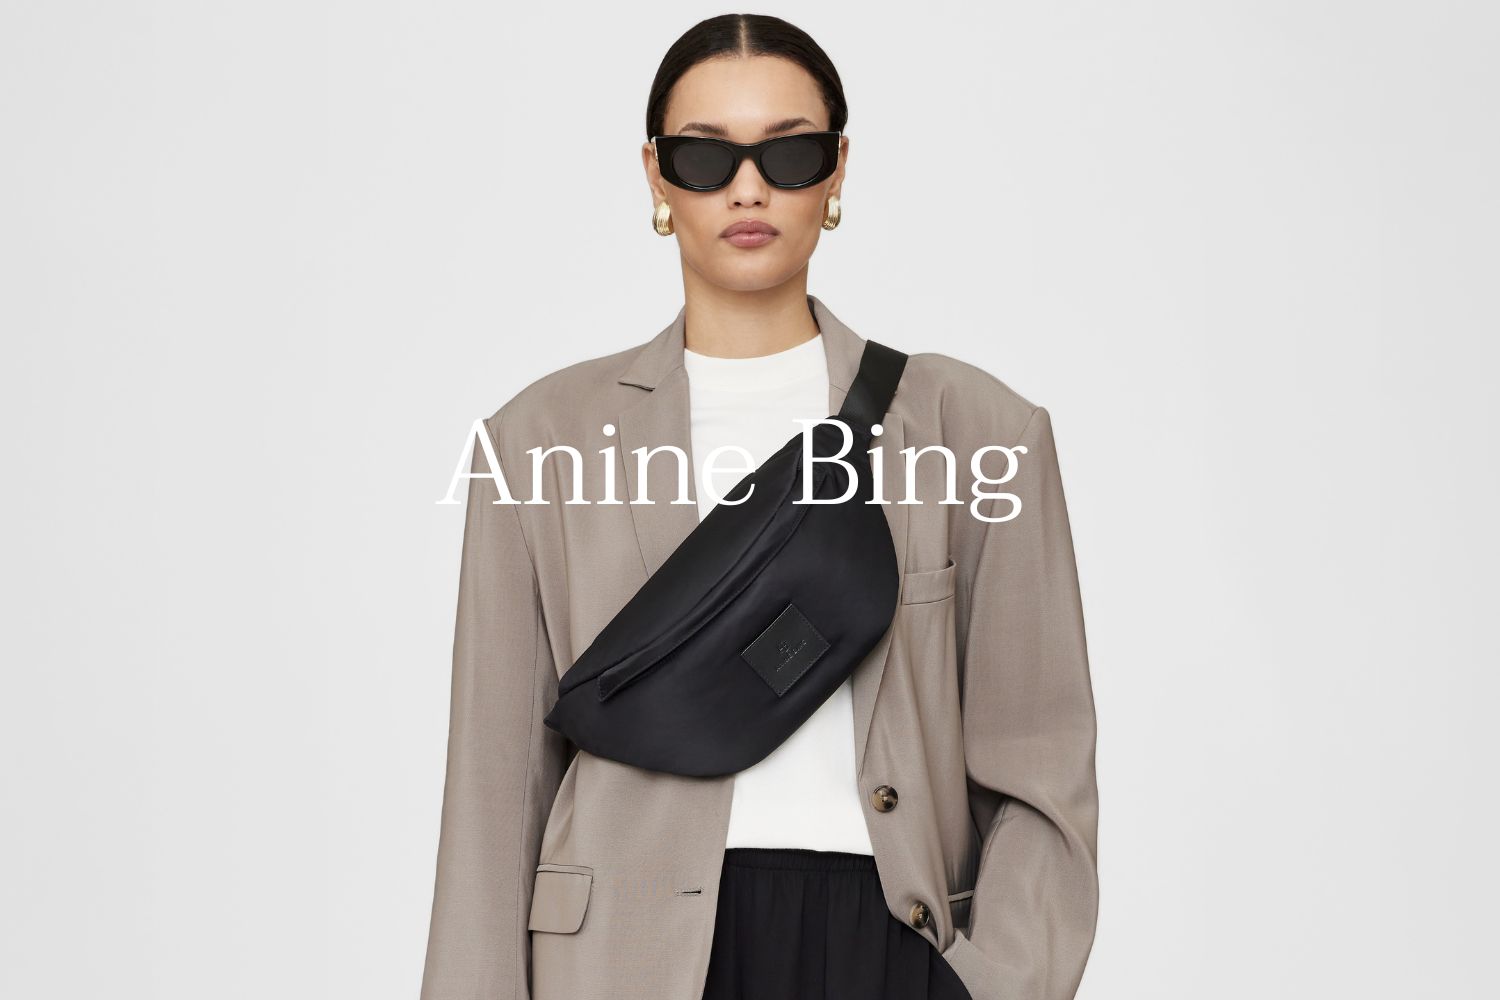 Anine Bing Shares Her Golden Style Rules To Live By